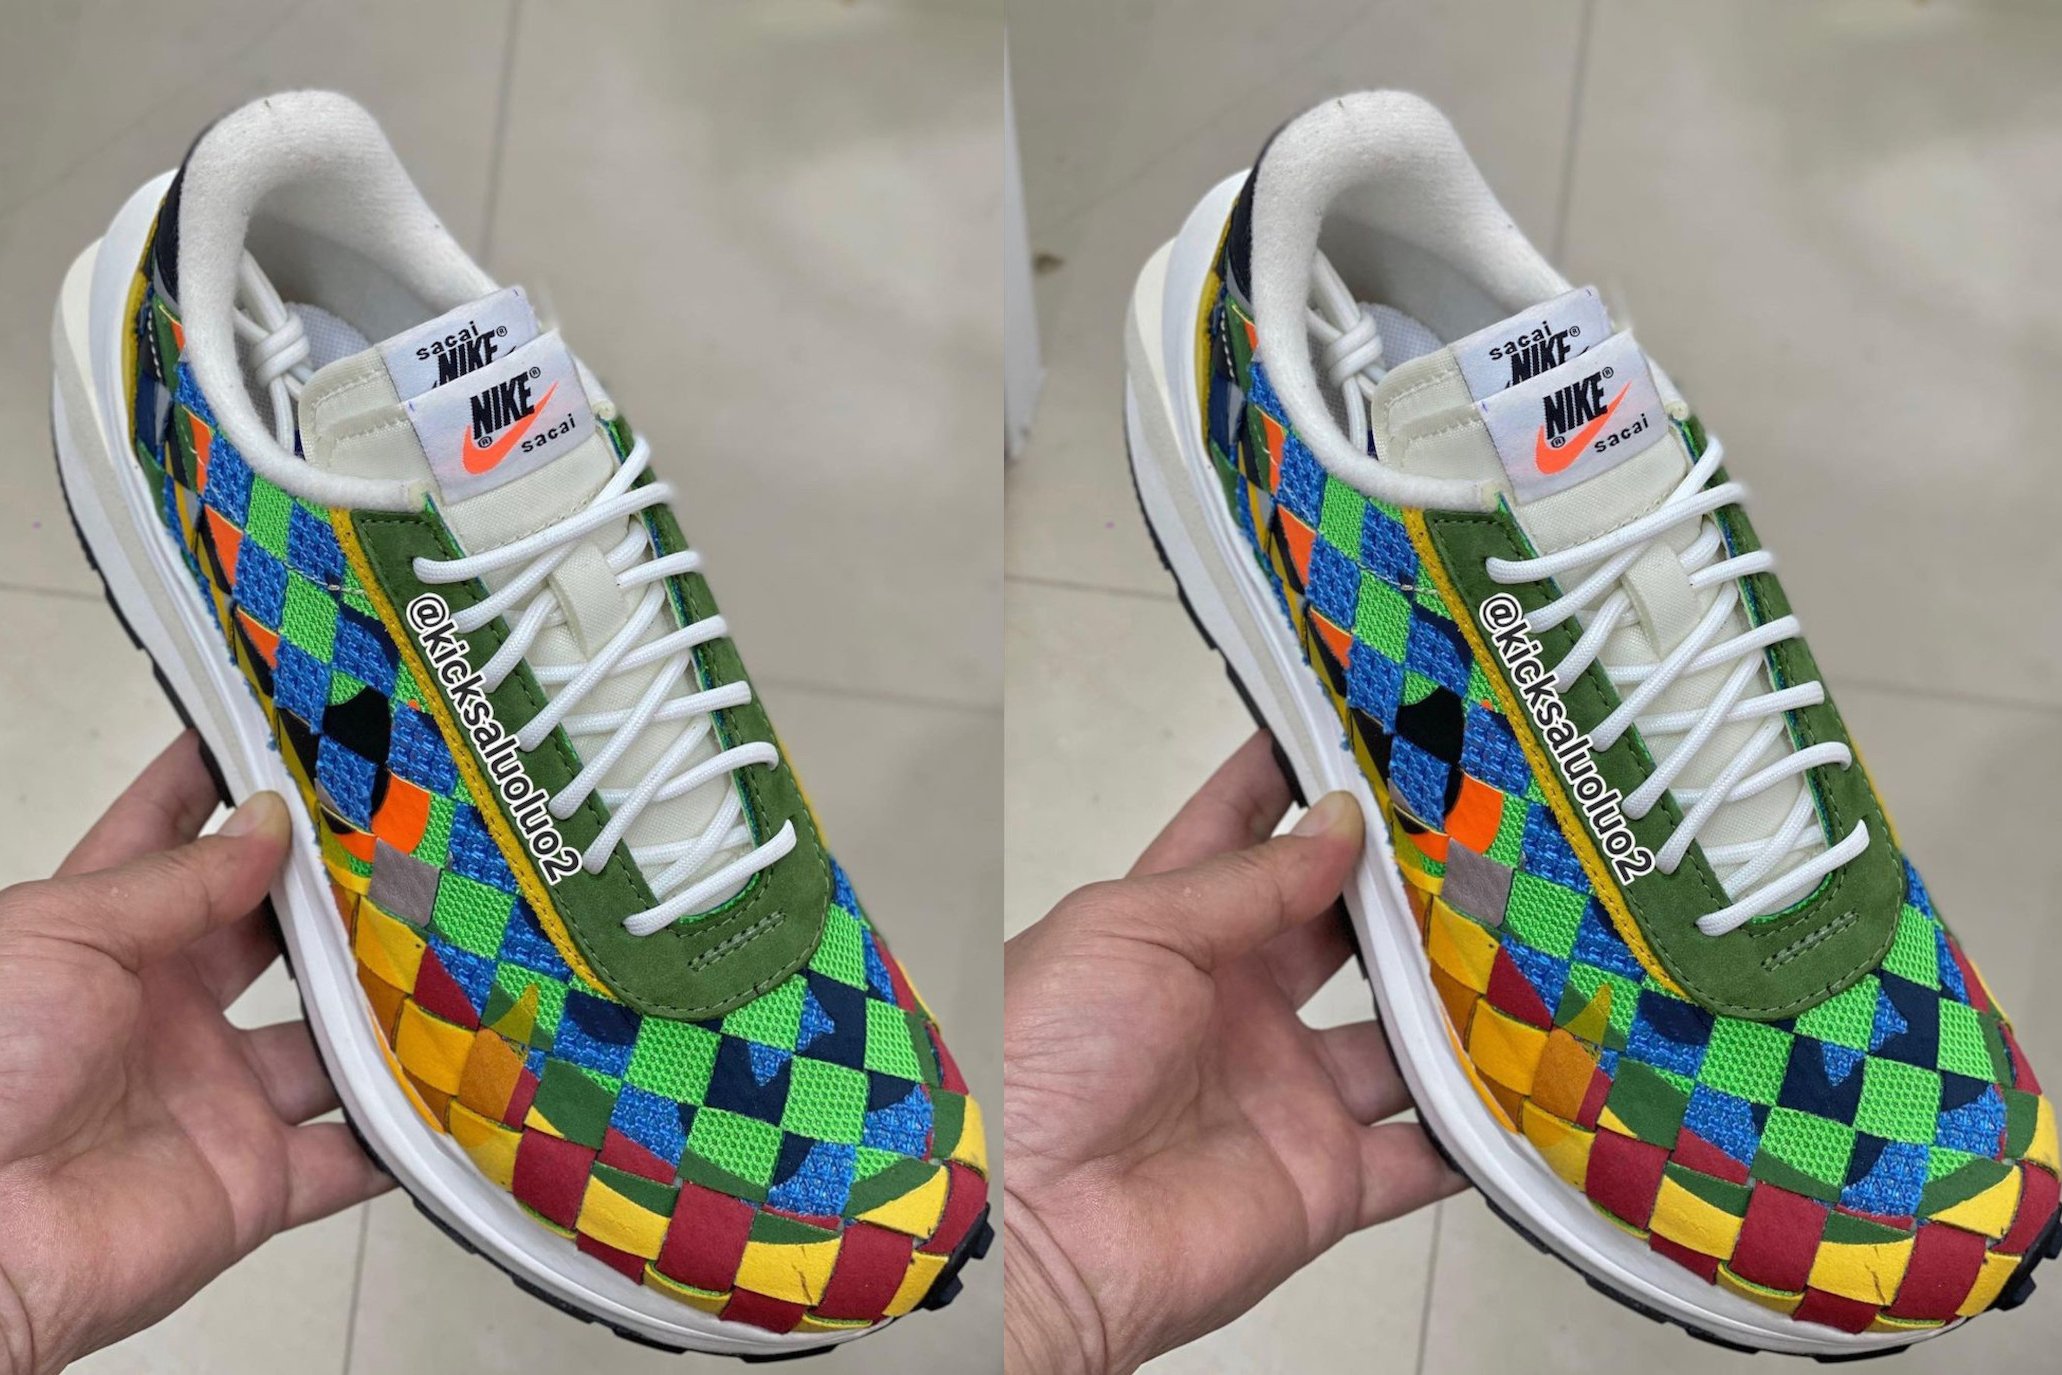 A “Multi-Color” sacai x Nike Waffle Woven Is on the Way